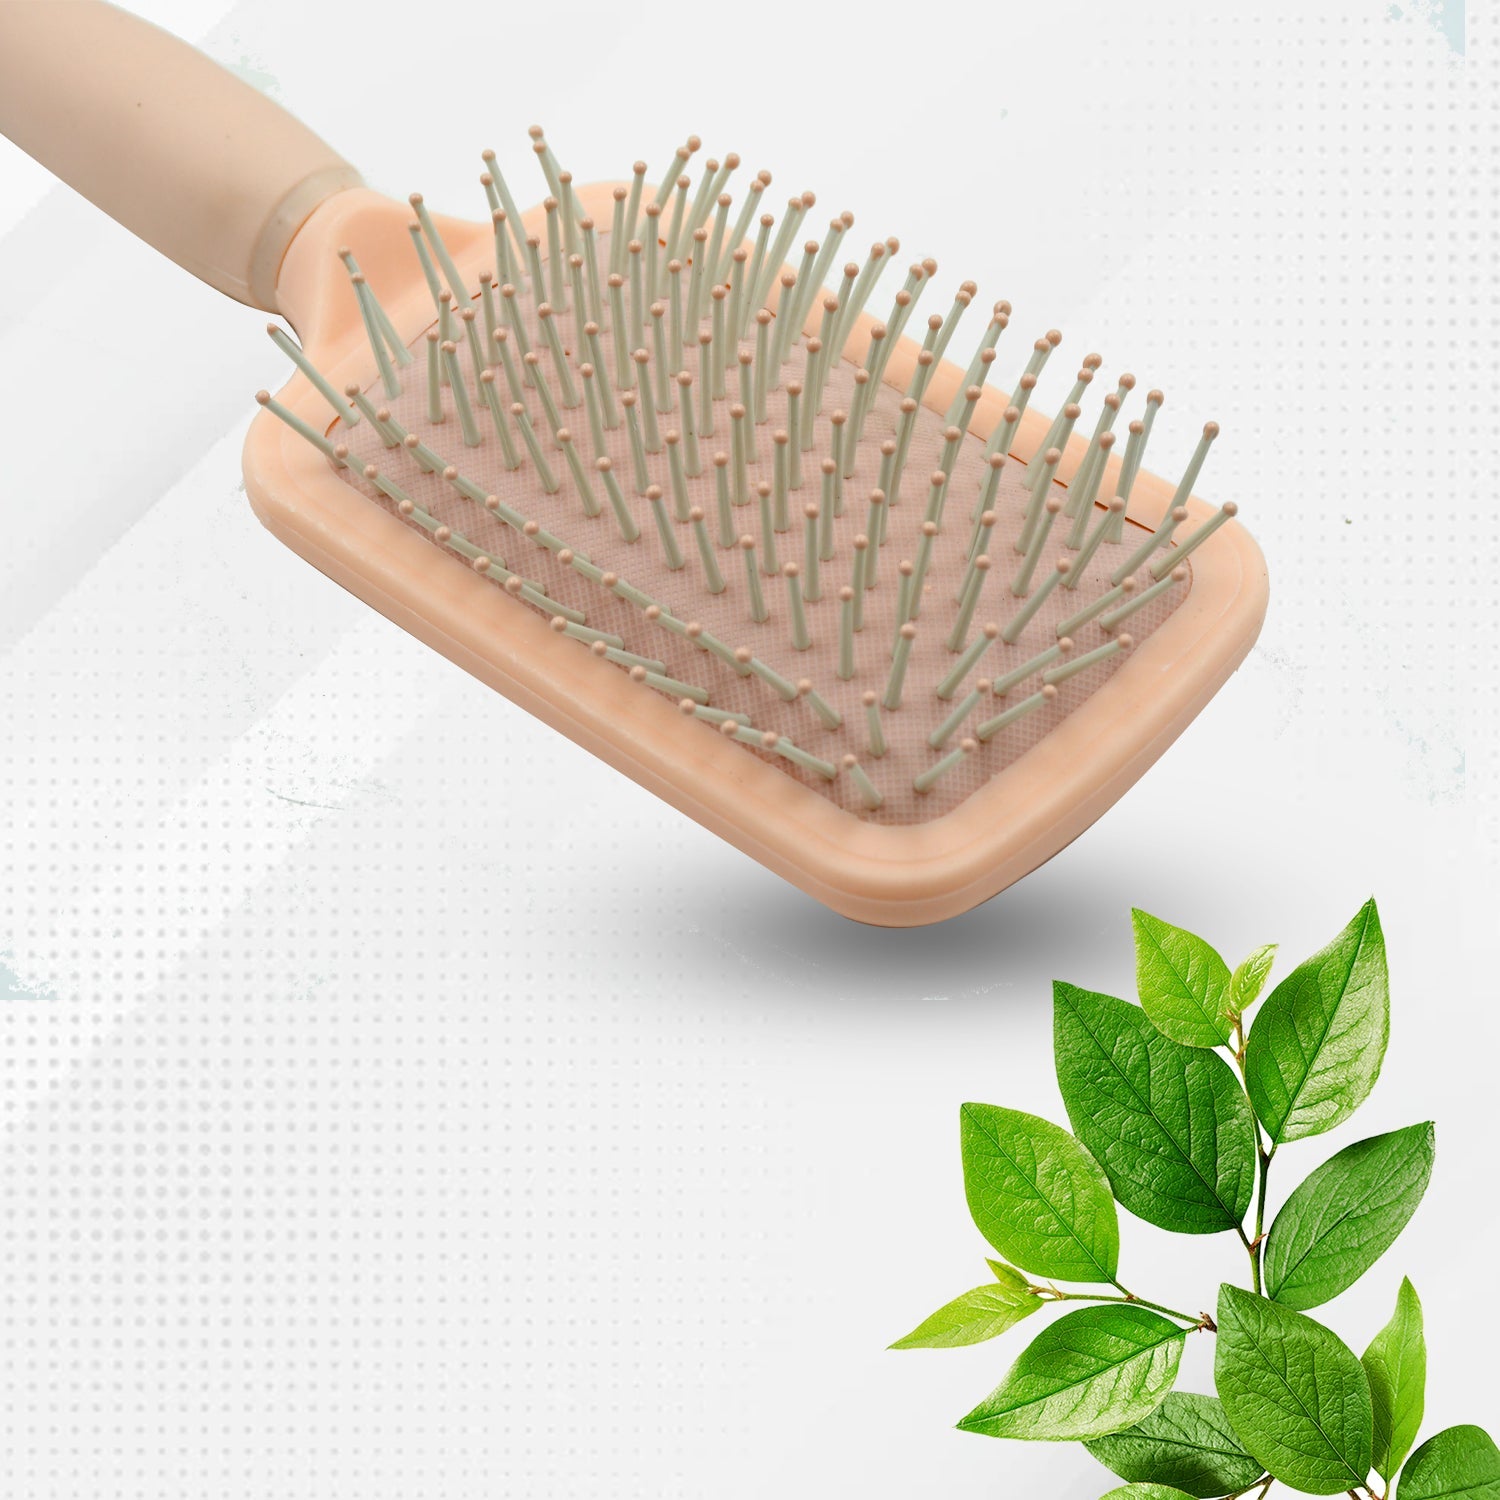 12547 Massage Comb, Massage Hair Brush Ergonomic Matt Disappointment for Straight Curly Hair Cushion Curly Hair Comb For Detangling Professional Comb For Men And Women for All Hair Types, Home Salon DIY Hairdressing Tool  (1 Pc / 24 Cm)